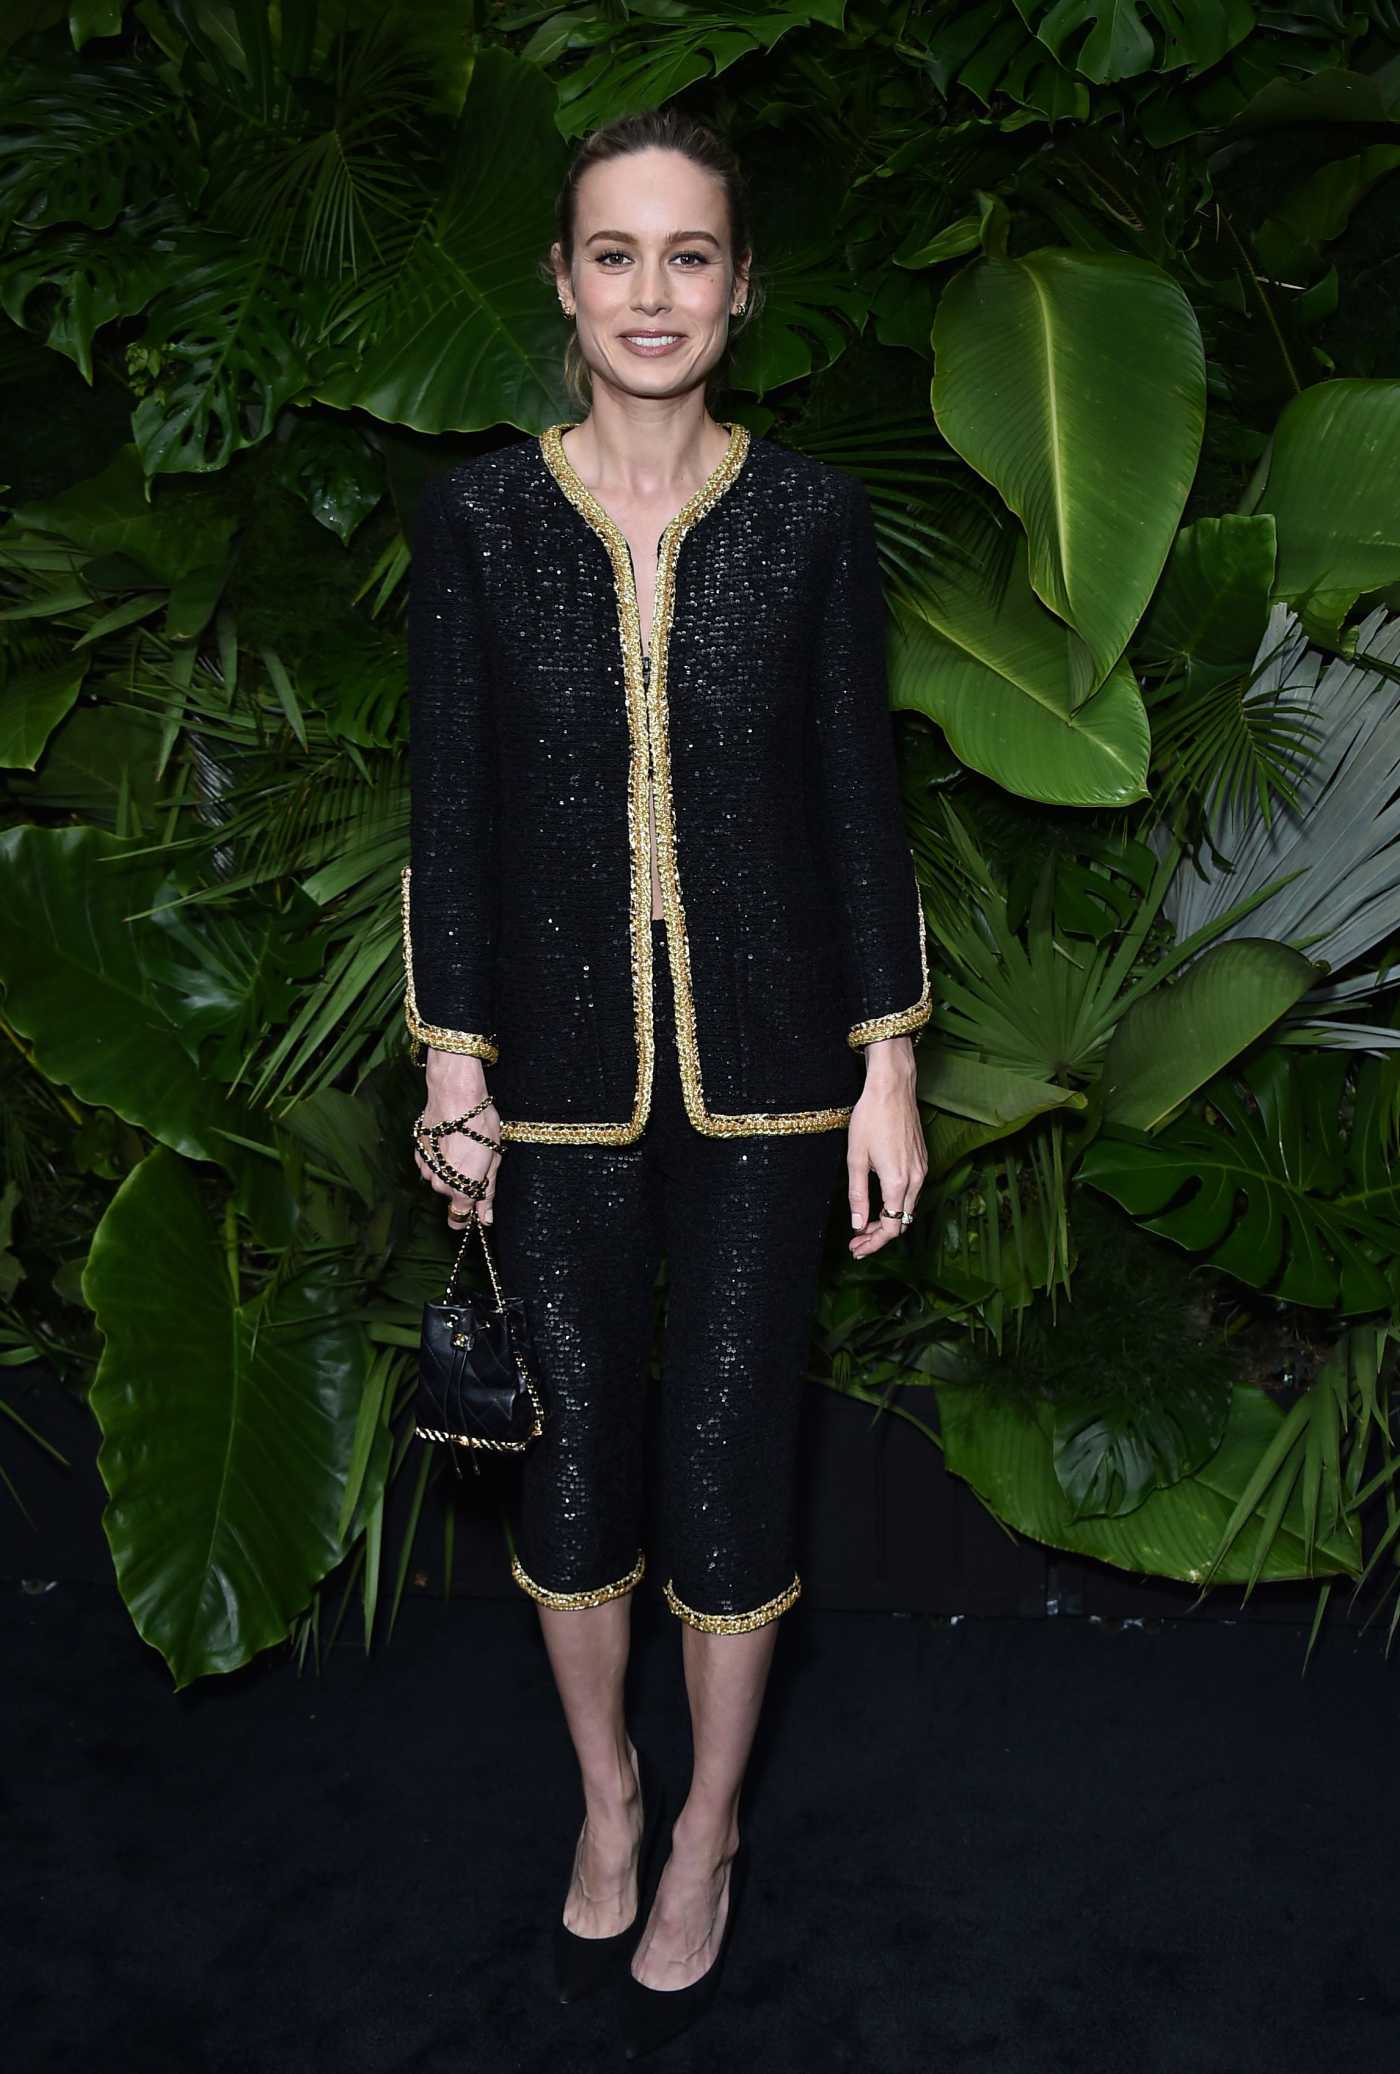 Brie Larson Attends the Chanel and Charles Finch Pre-Oscar Awards Dinner at the Polo Lounge in Beverly Hills 03/26/2022